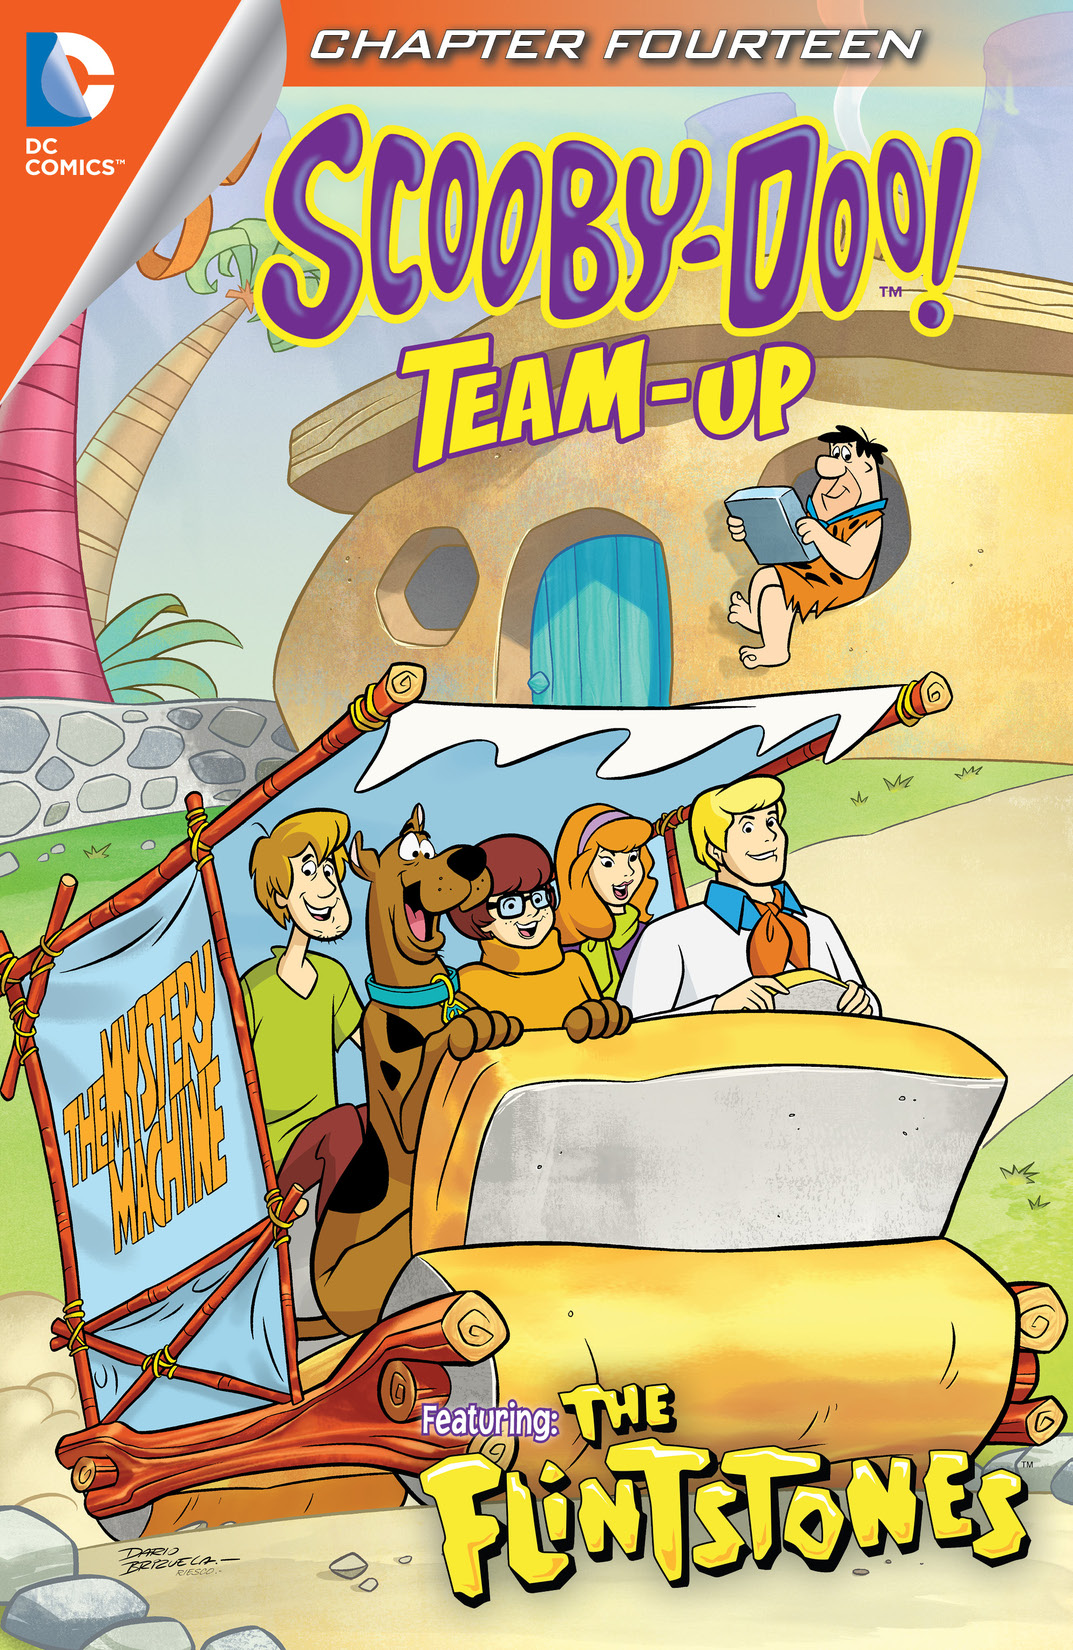 Scooby-Doo Team-Up #14 preview images